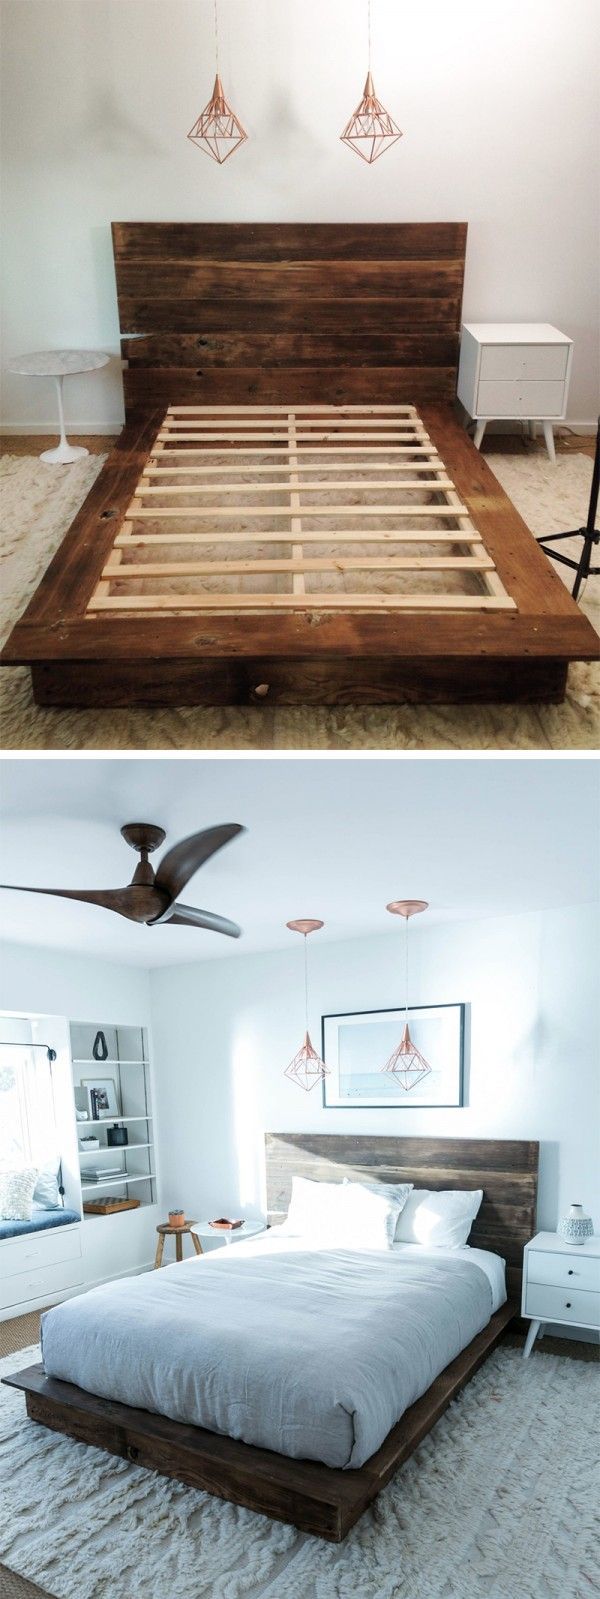 61 Easy DIY Bed Frames You Can Build on a Budget - 61 Easy DIY Bed Frames You Can Build on a Budget -   17 diy Bed Frame black ideas